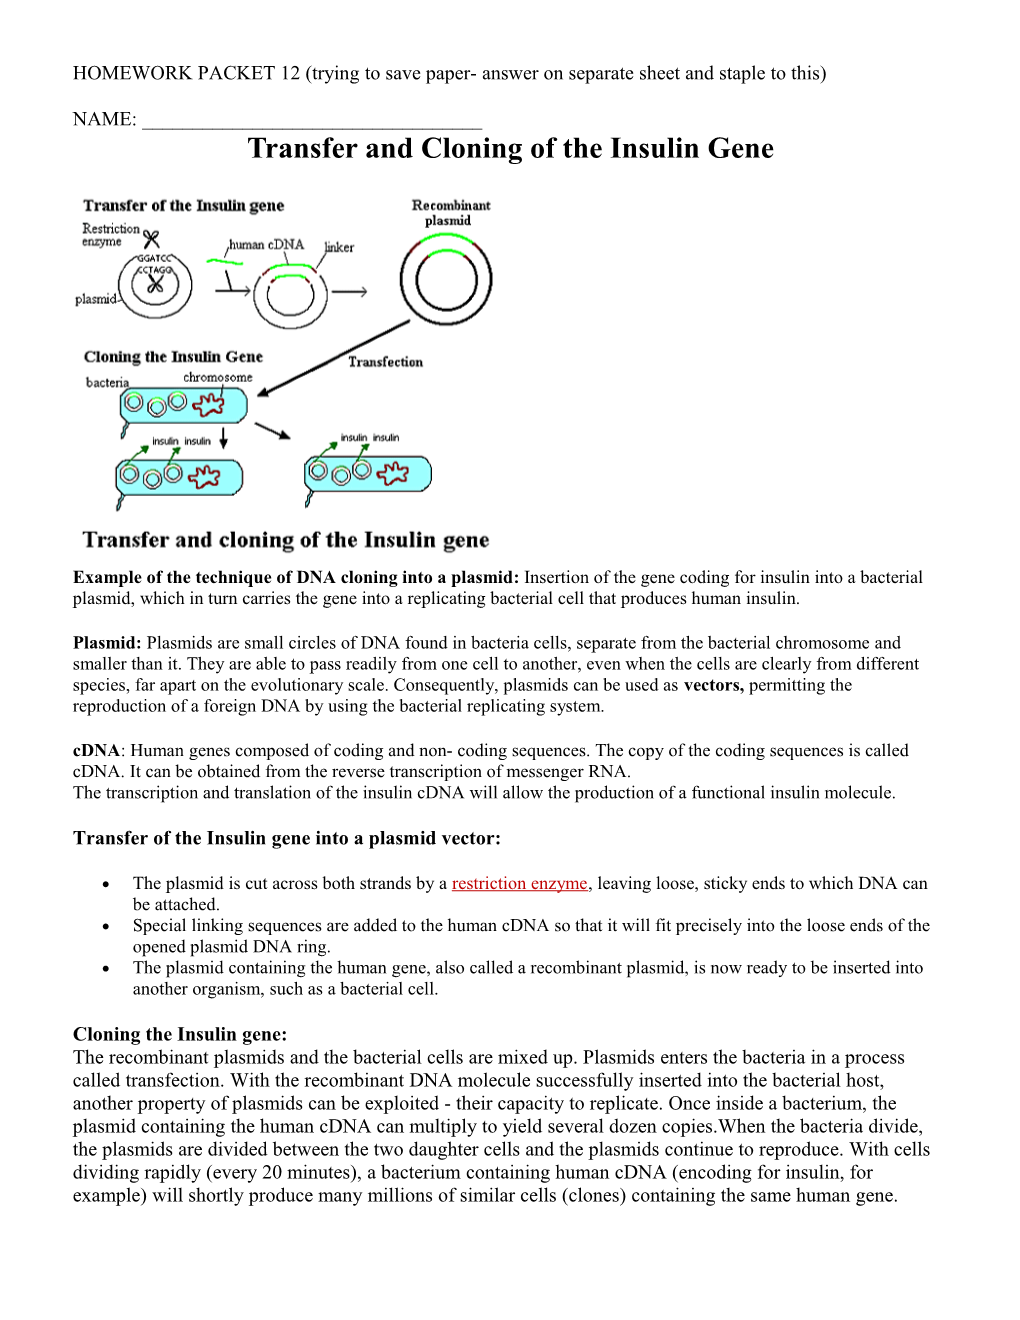 Transfer and Cloning of the Insulin Gene